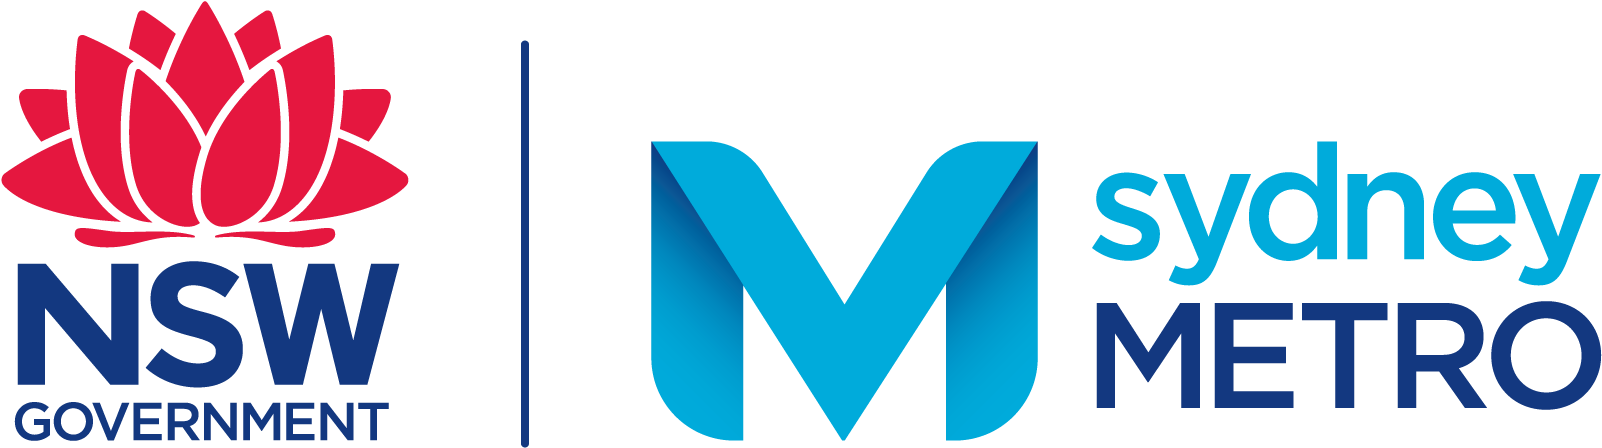 About - Sydney Metro John Holland (1608x450), Png Download